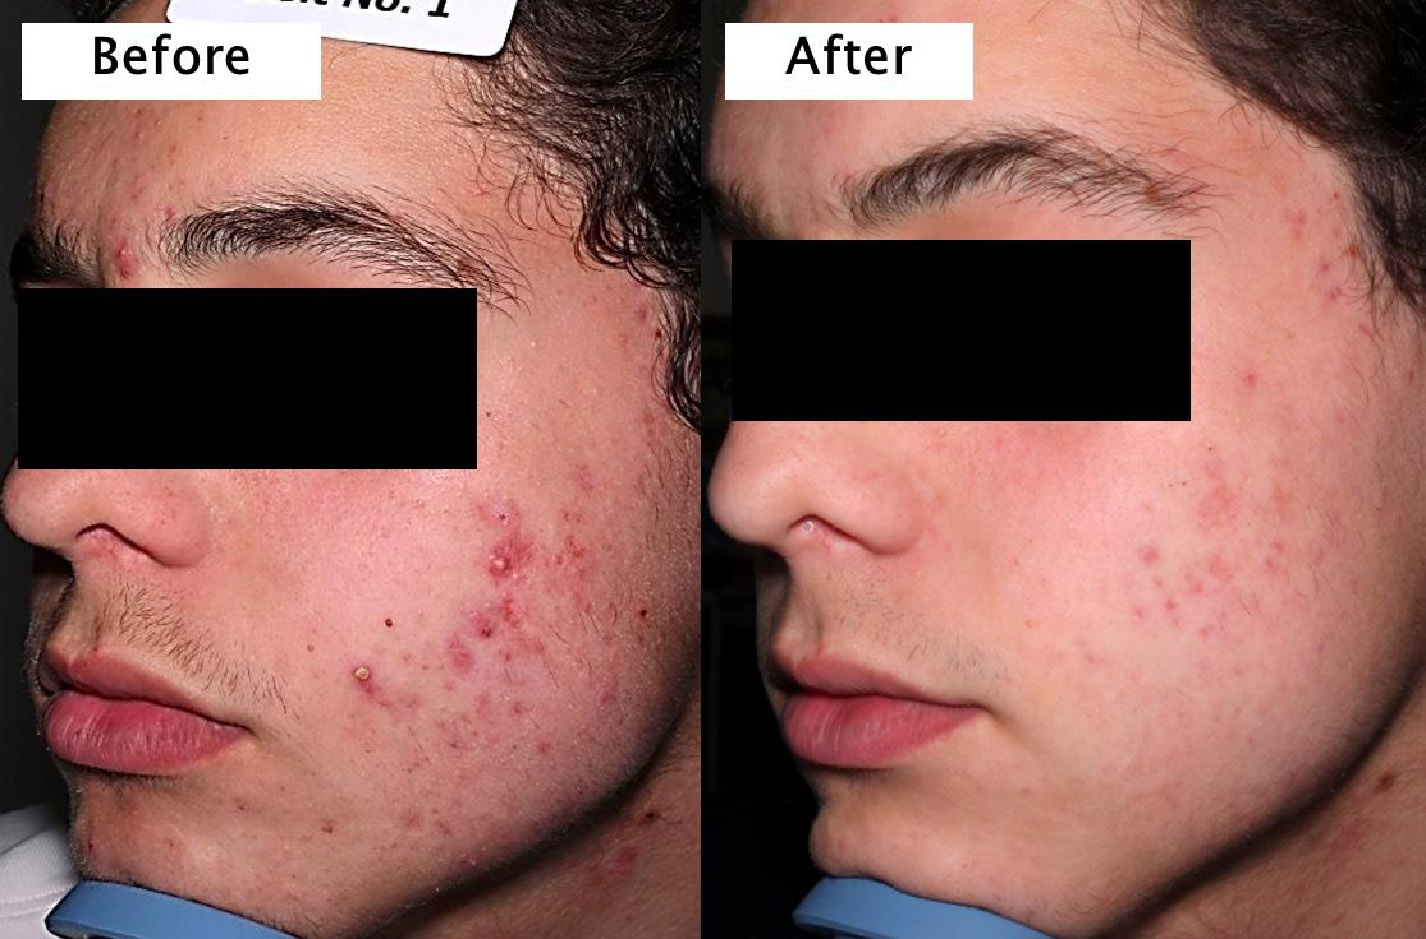 Doxycycline acne treatment results, how to have nice skin naturally